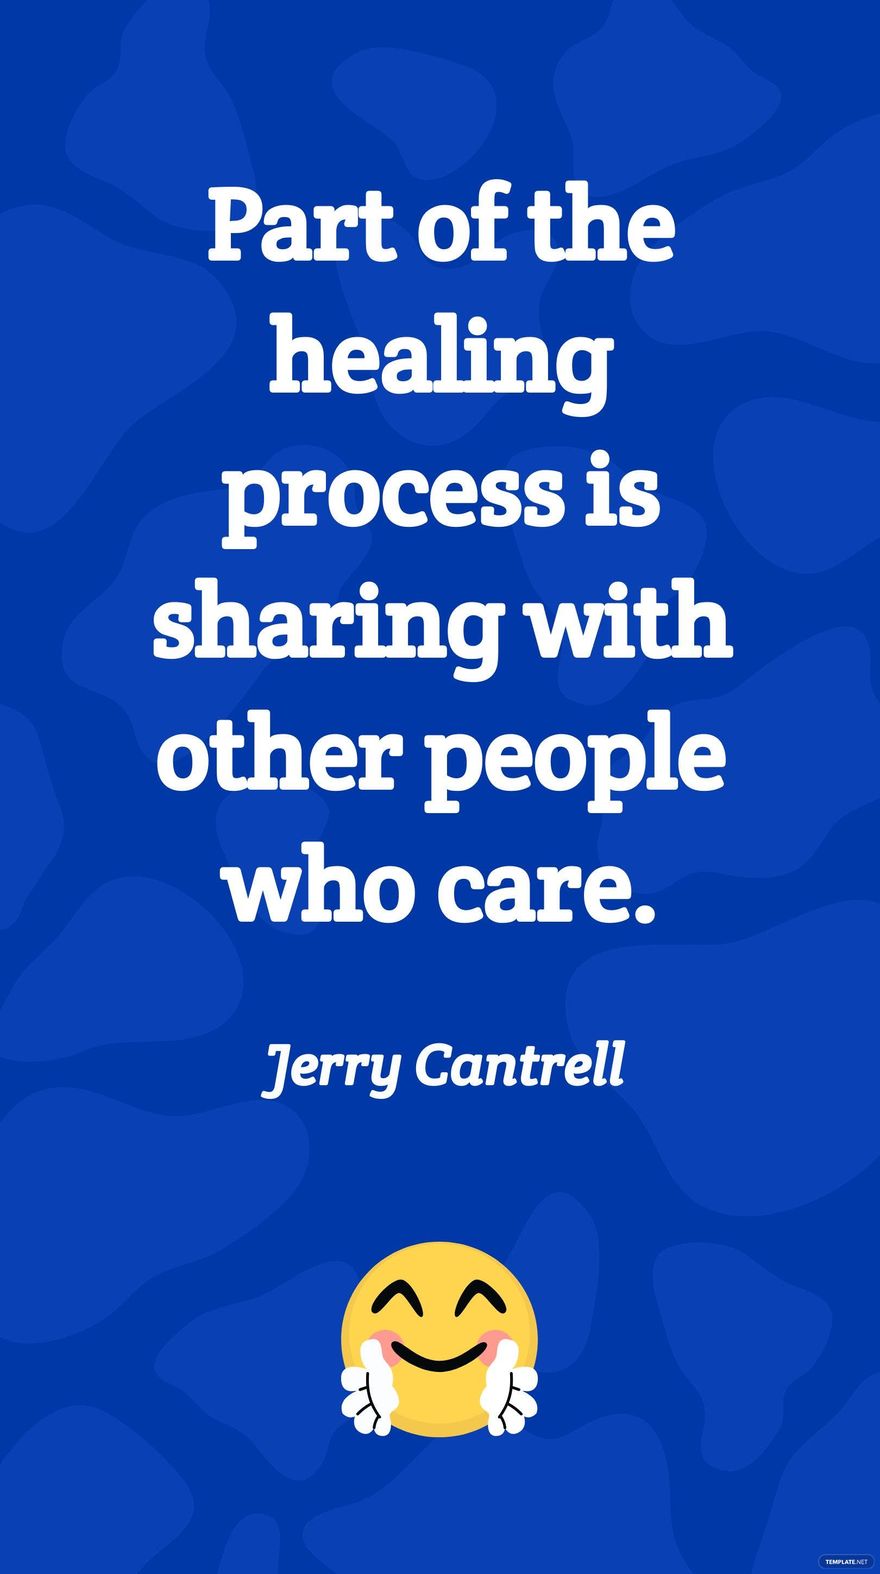 Jerry Cantrell - Part of the healing process is sharing with other people who care.